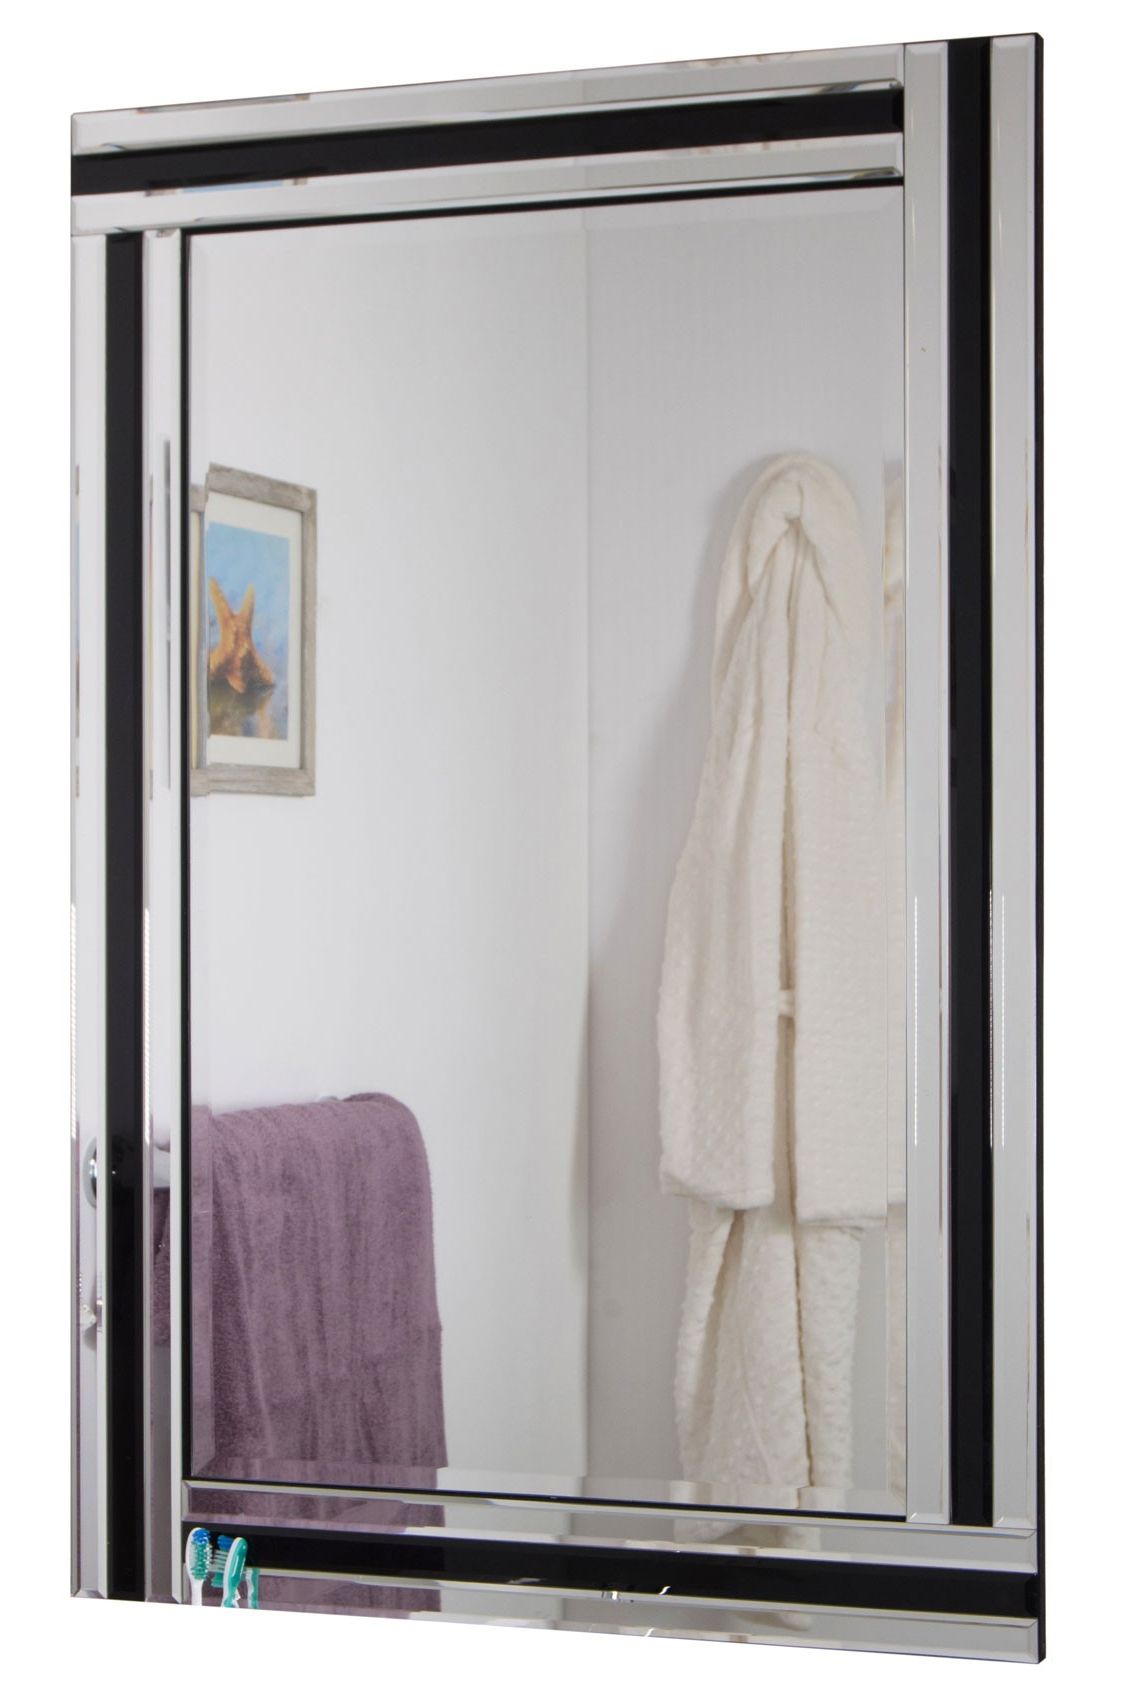 Famous Large Black And Silver Triple Edge Bathroom Wall Mirror 1ft11 X 2ft11 With Regard To Smoke Edge Wall Mirrors (View 8 of 15)